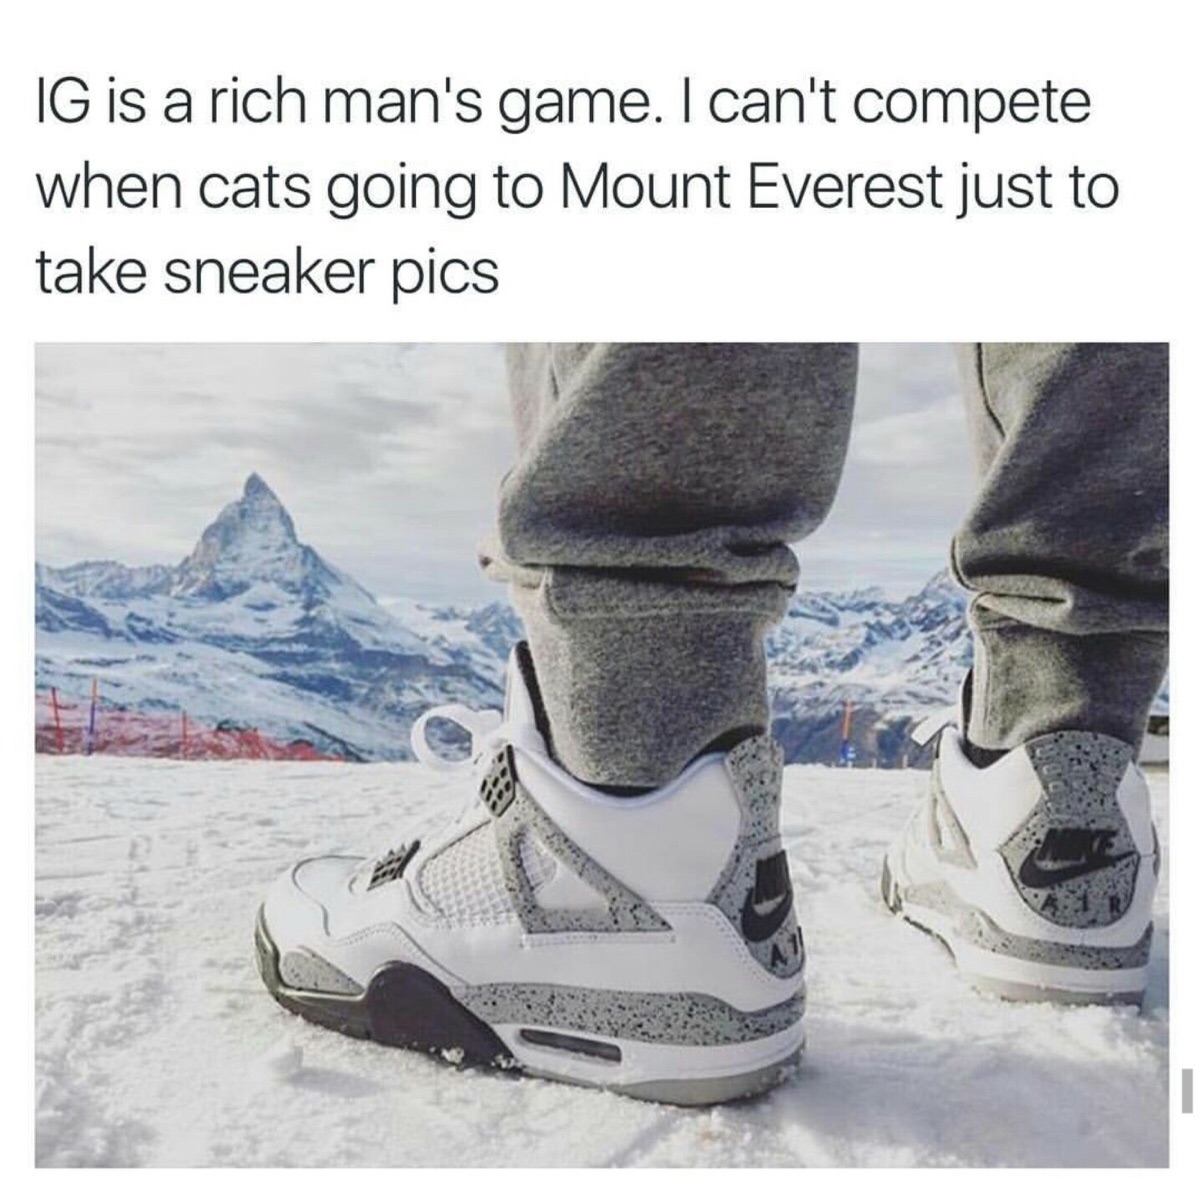 memes - gornergrat station - Ig is a rich man's game. I can't compete when cats going to Mount Everest just to take sneaker pics